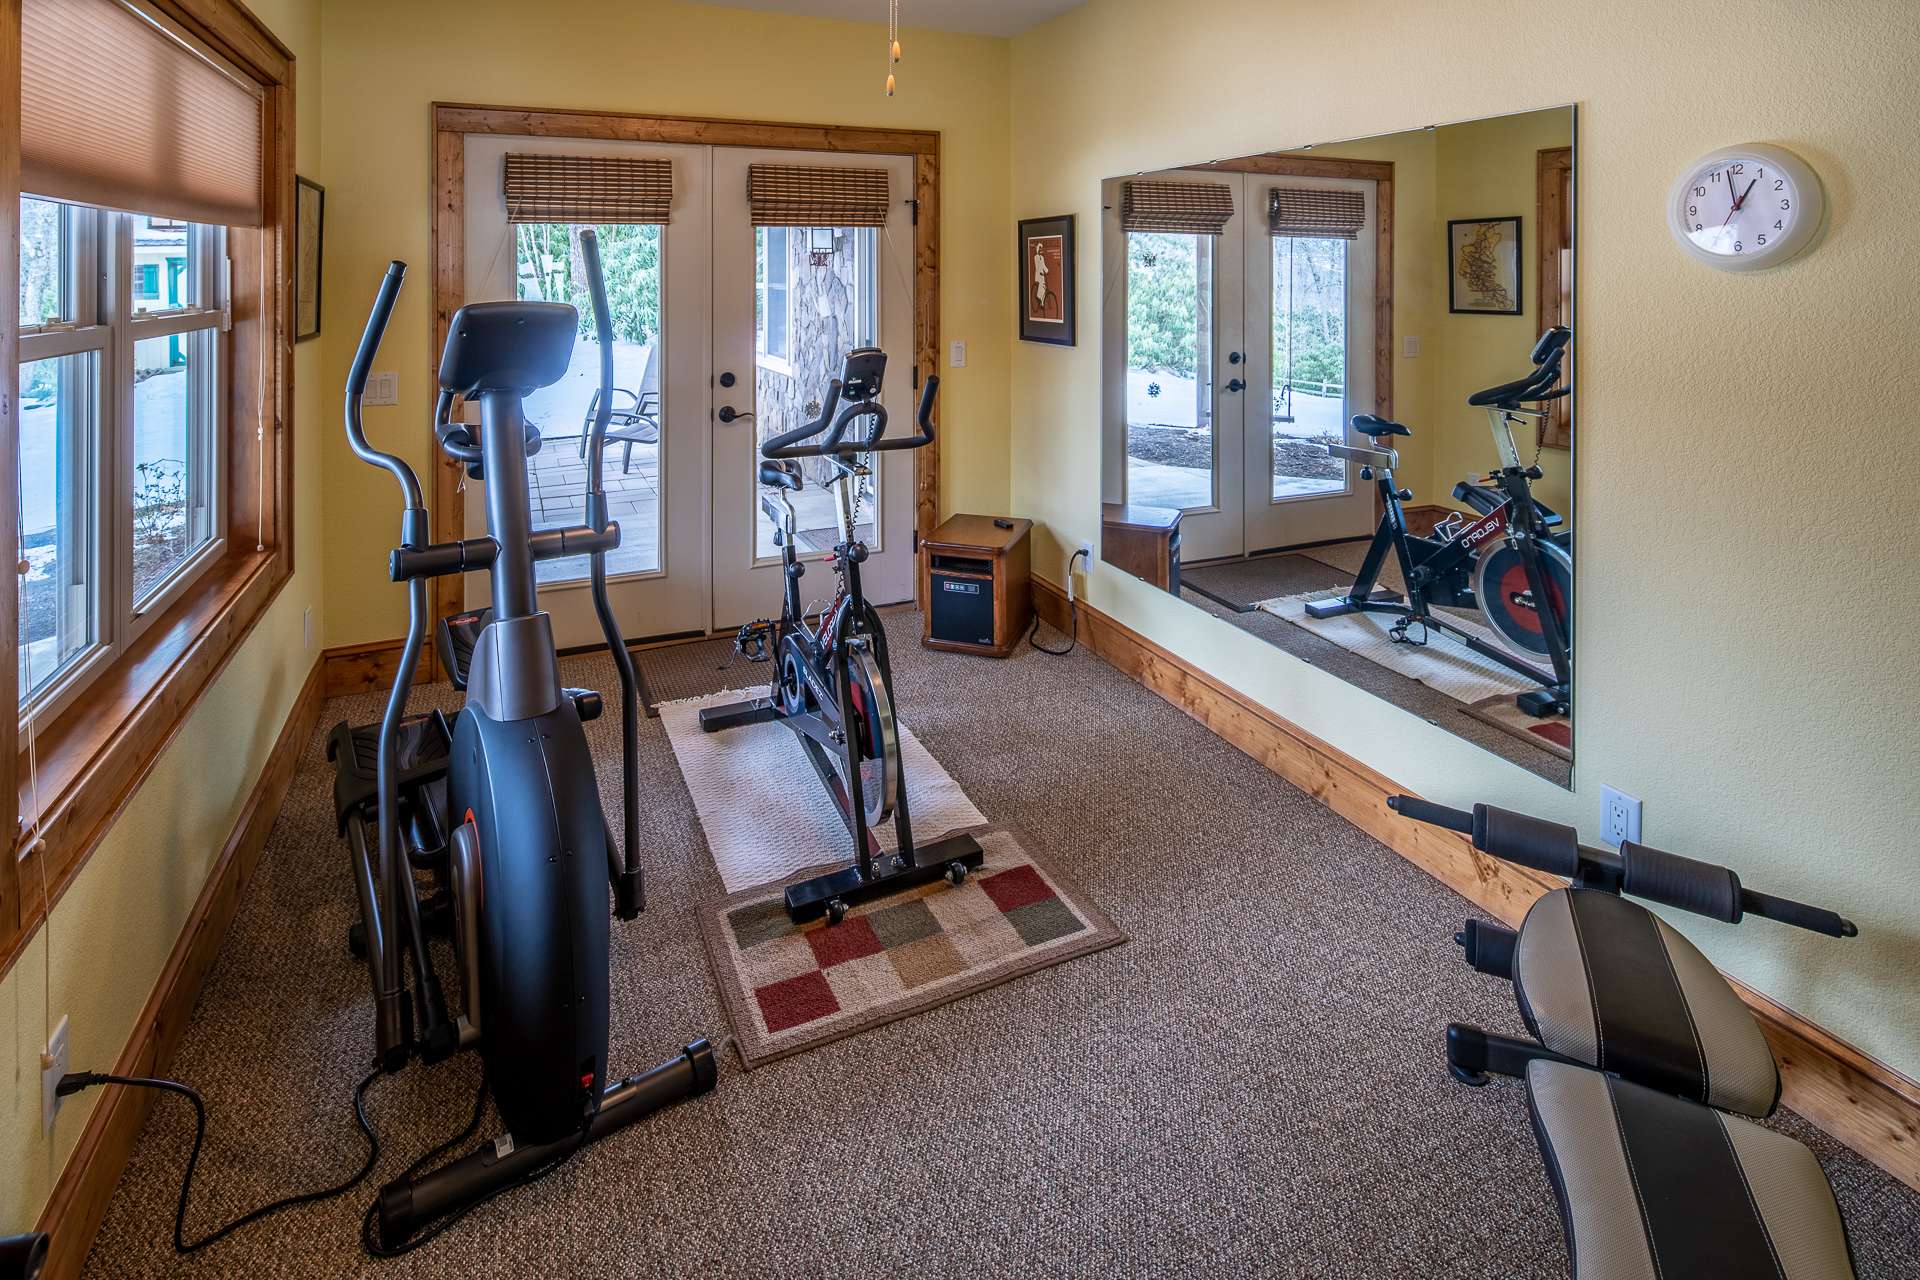 This bonus room is perfect for a small home gym or it could serve as a fourth bedroom if needed. It also provides access to the patio.